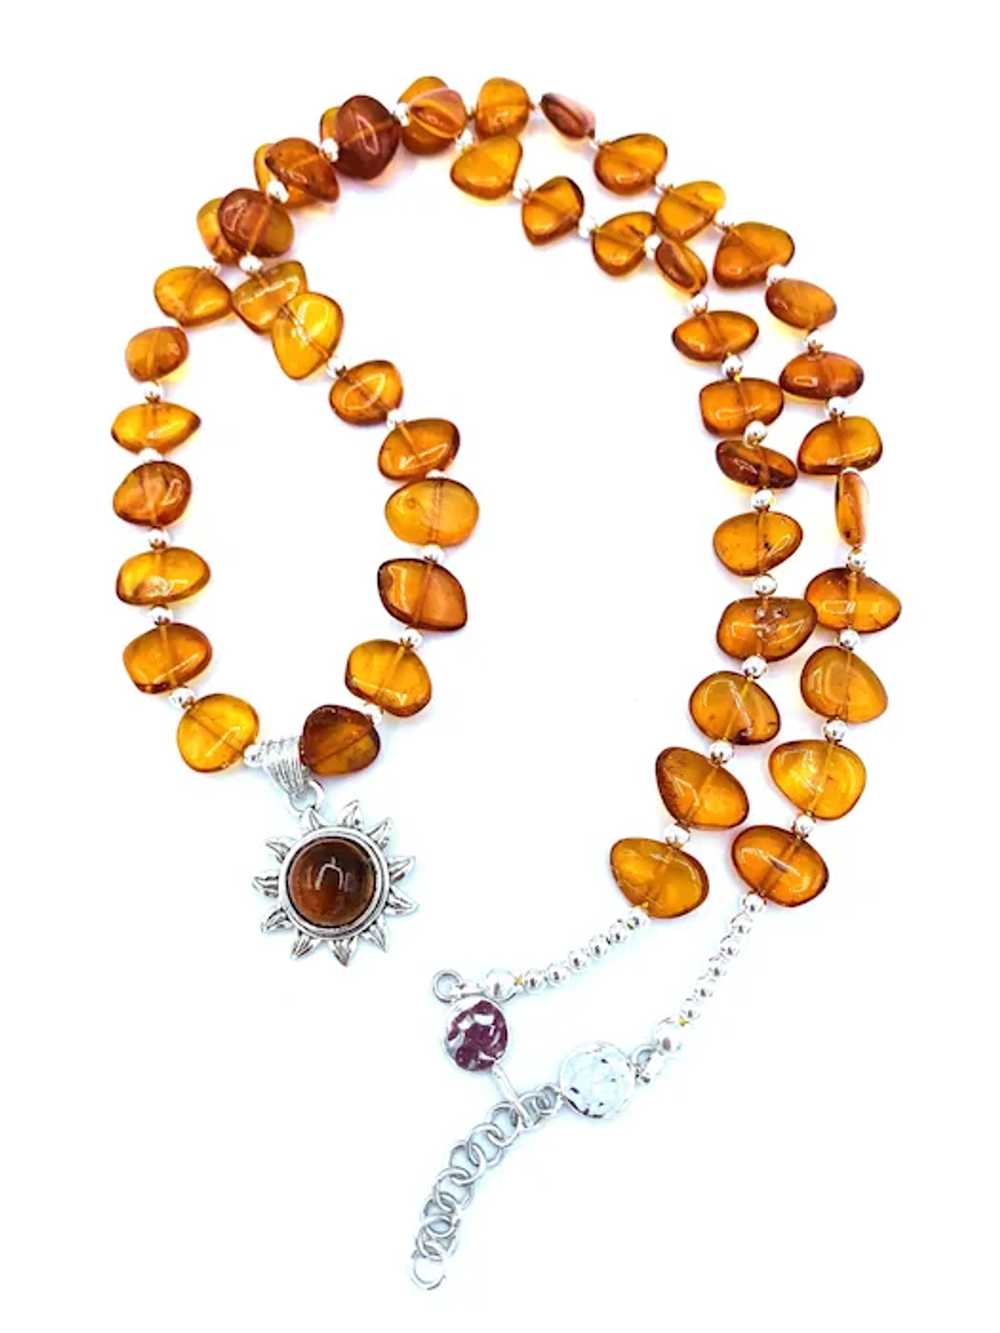 Necklace of Honey Amber and Sterling Silver - image 4